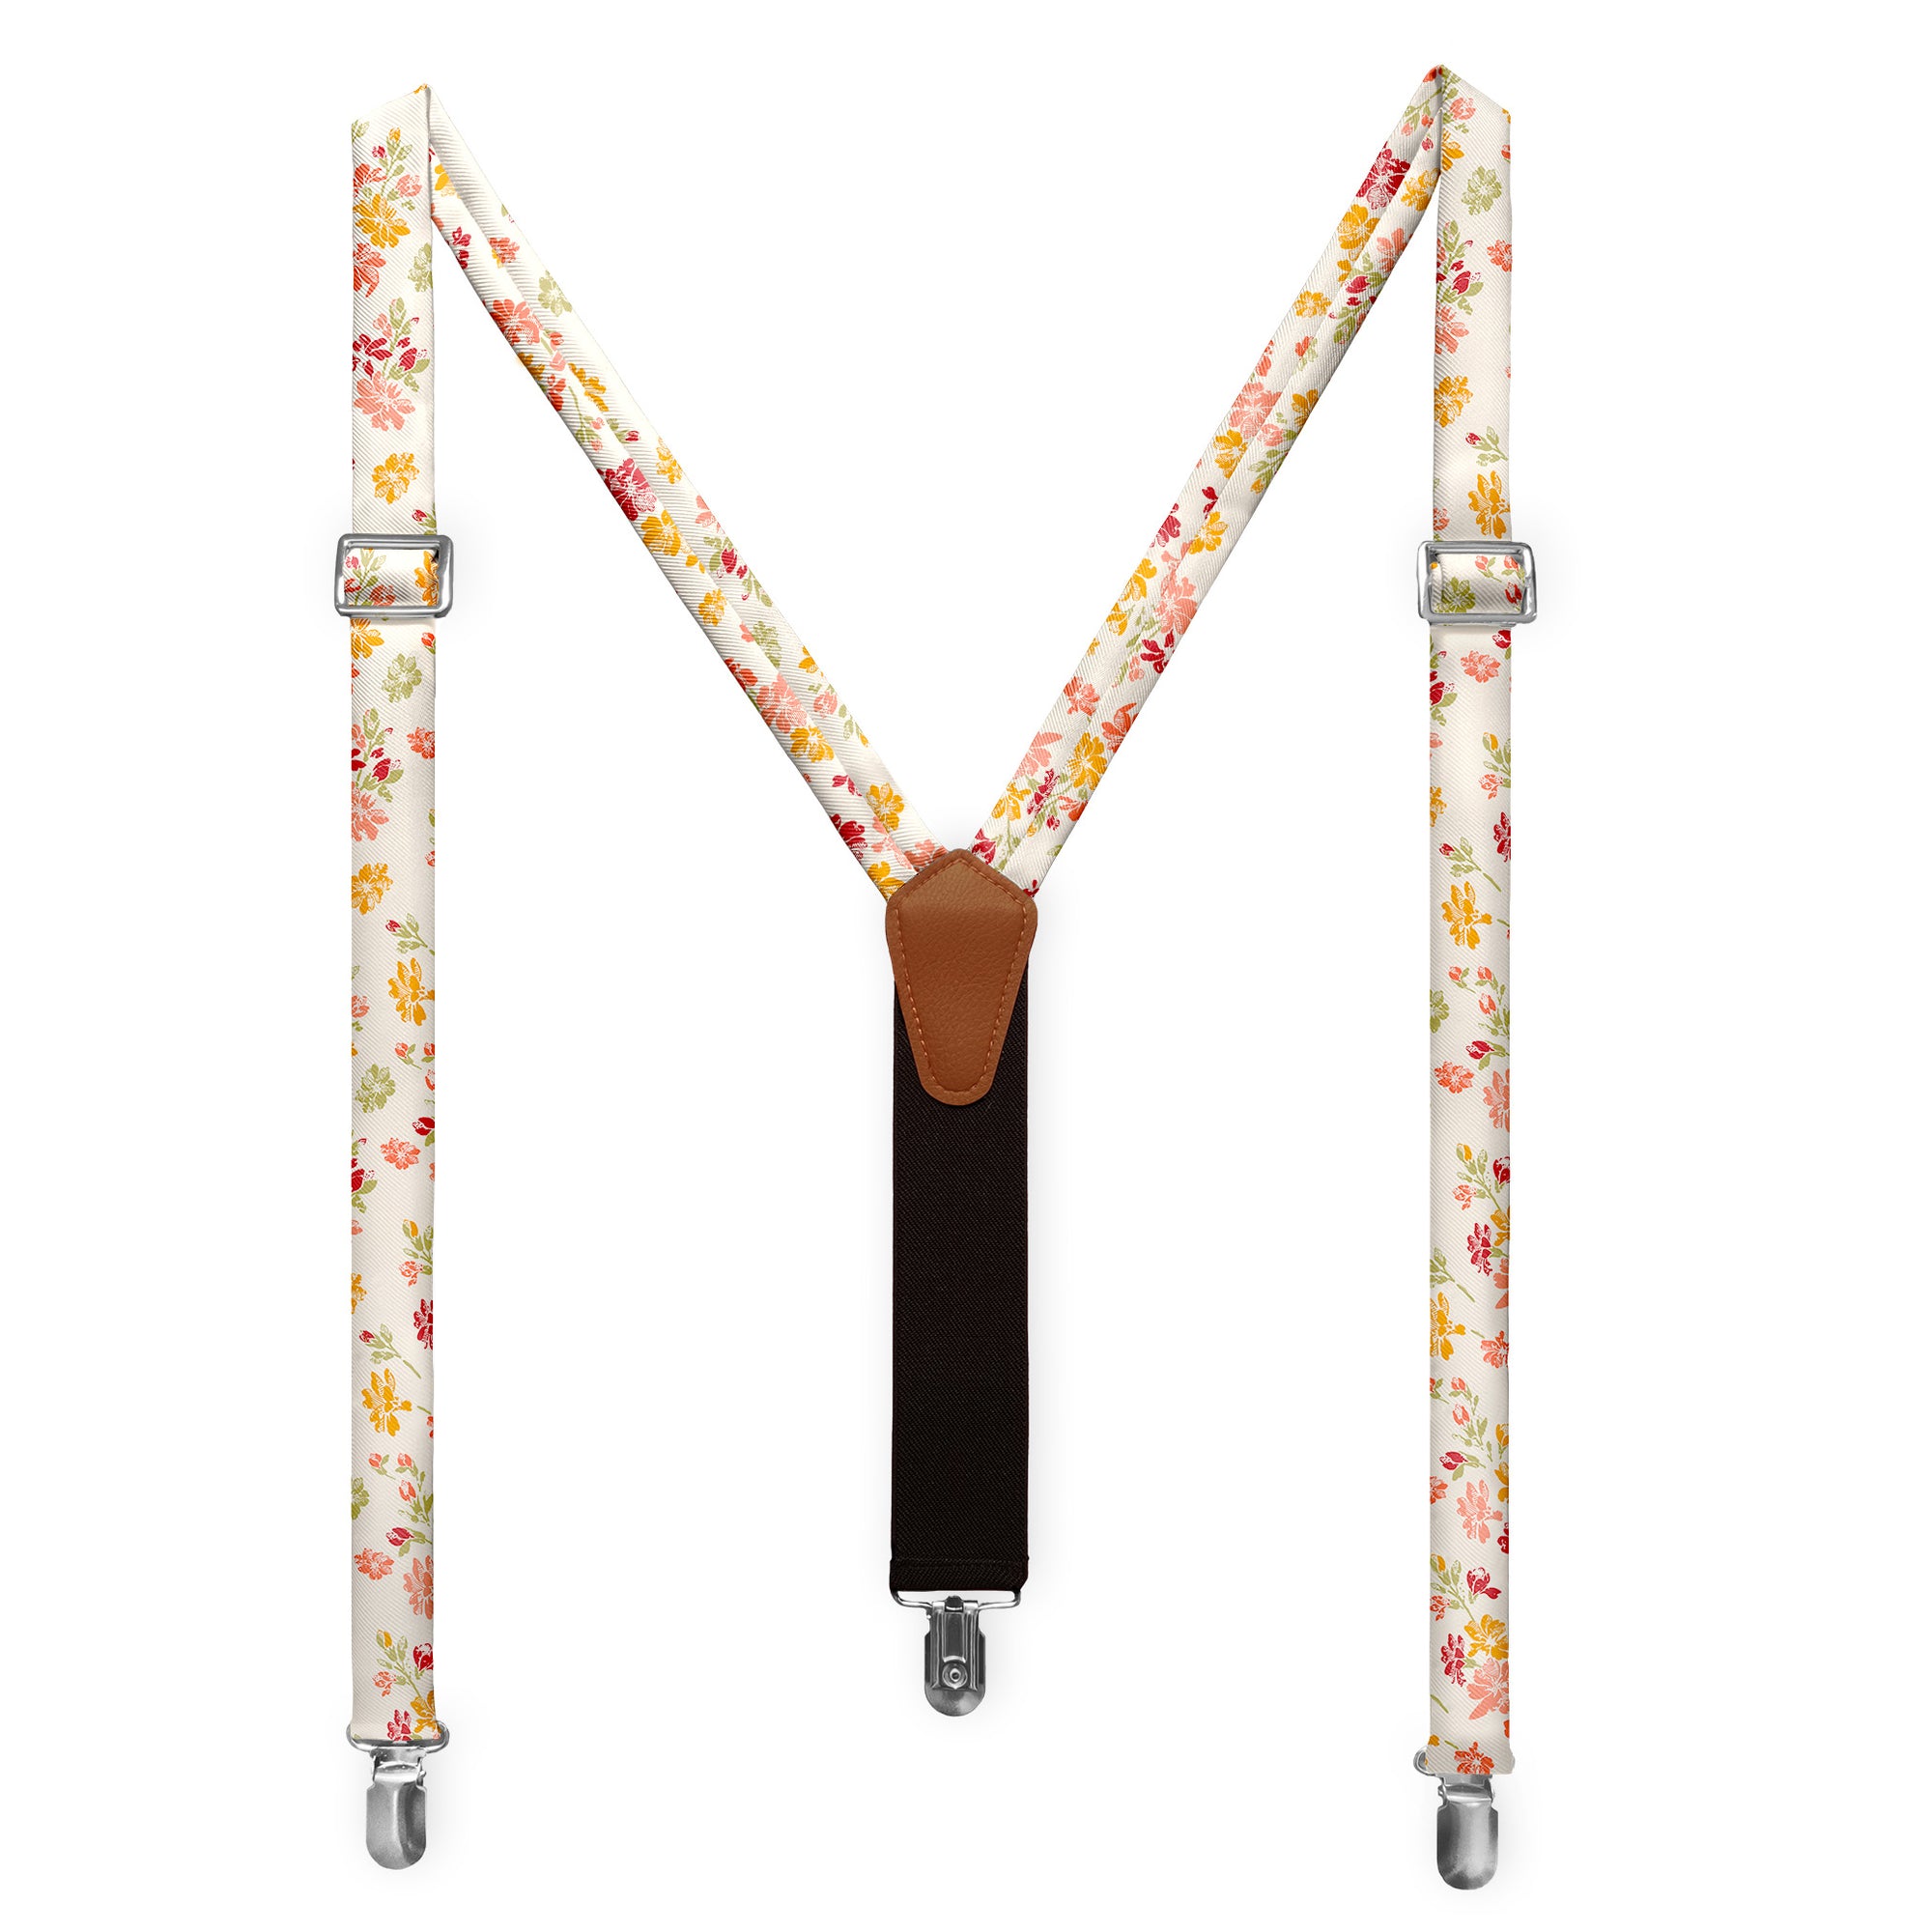 Stamped Floral Suspenders - Adult Short 36-40" -  - Knotty Tie Co.